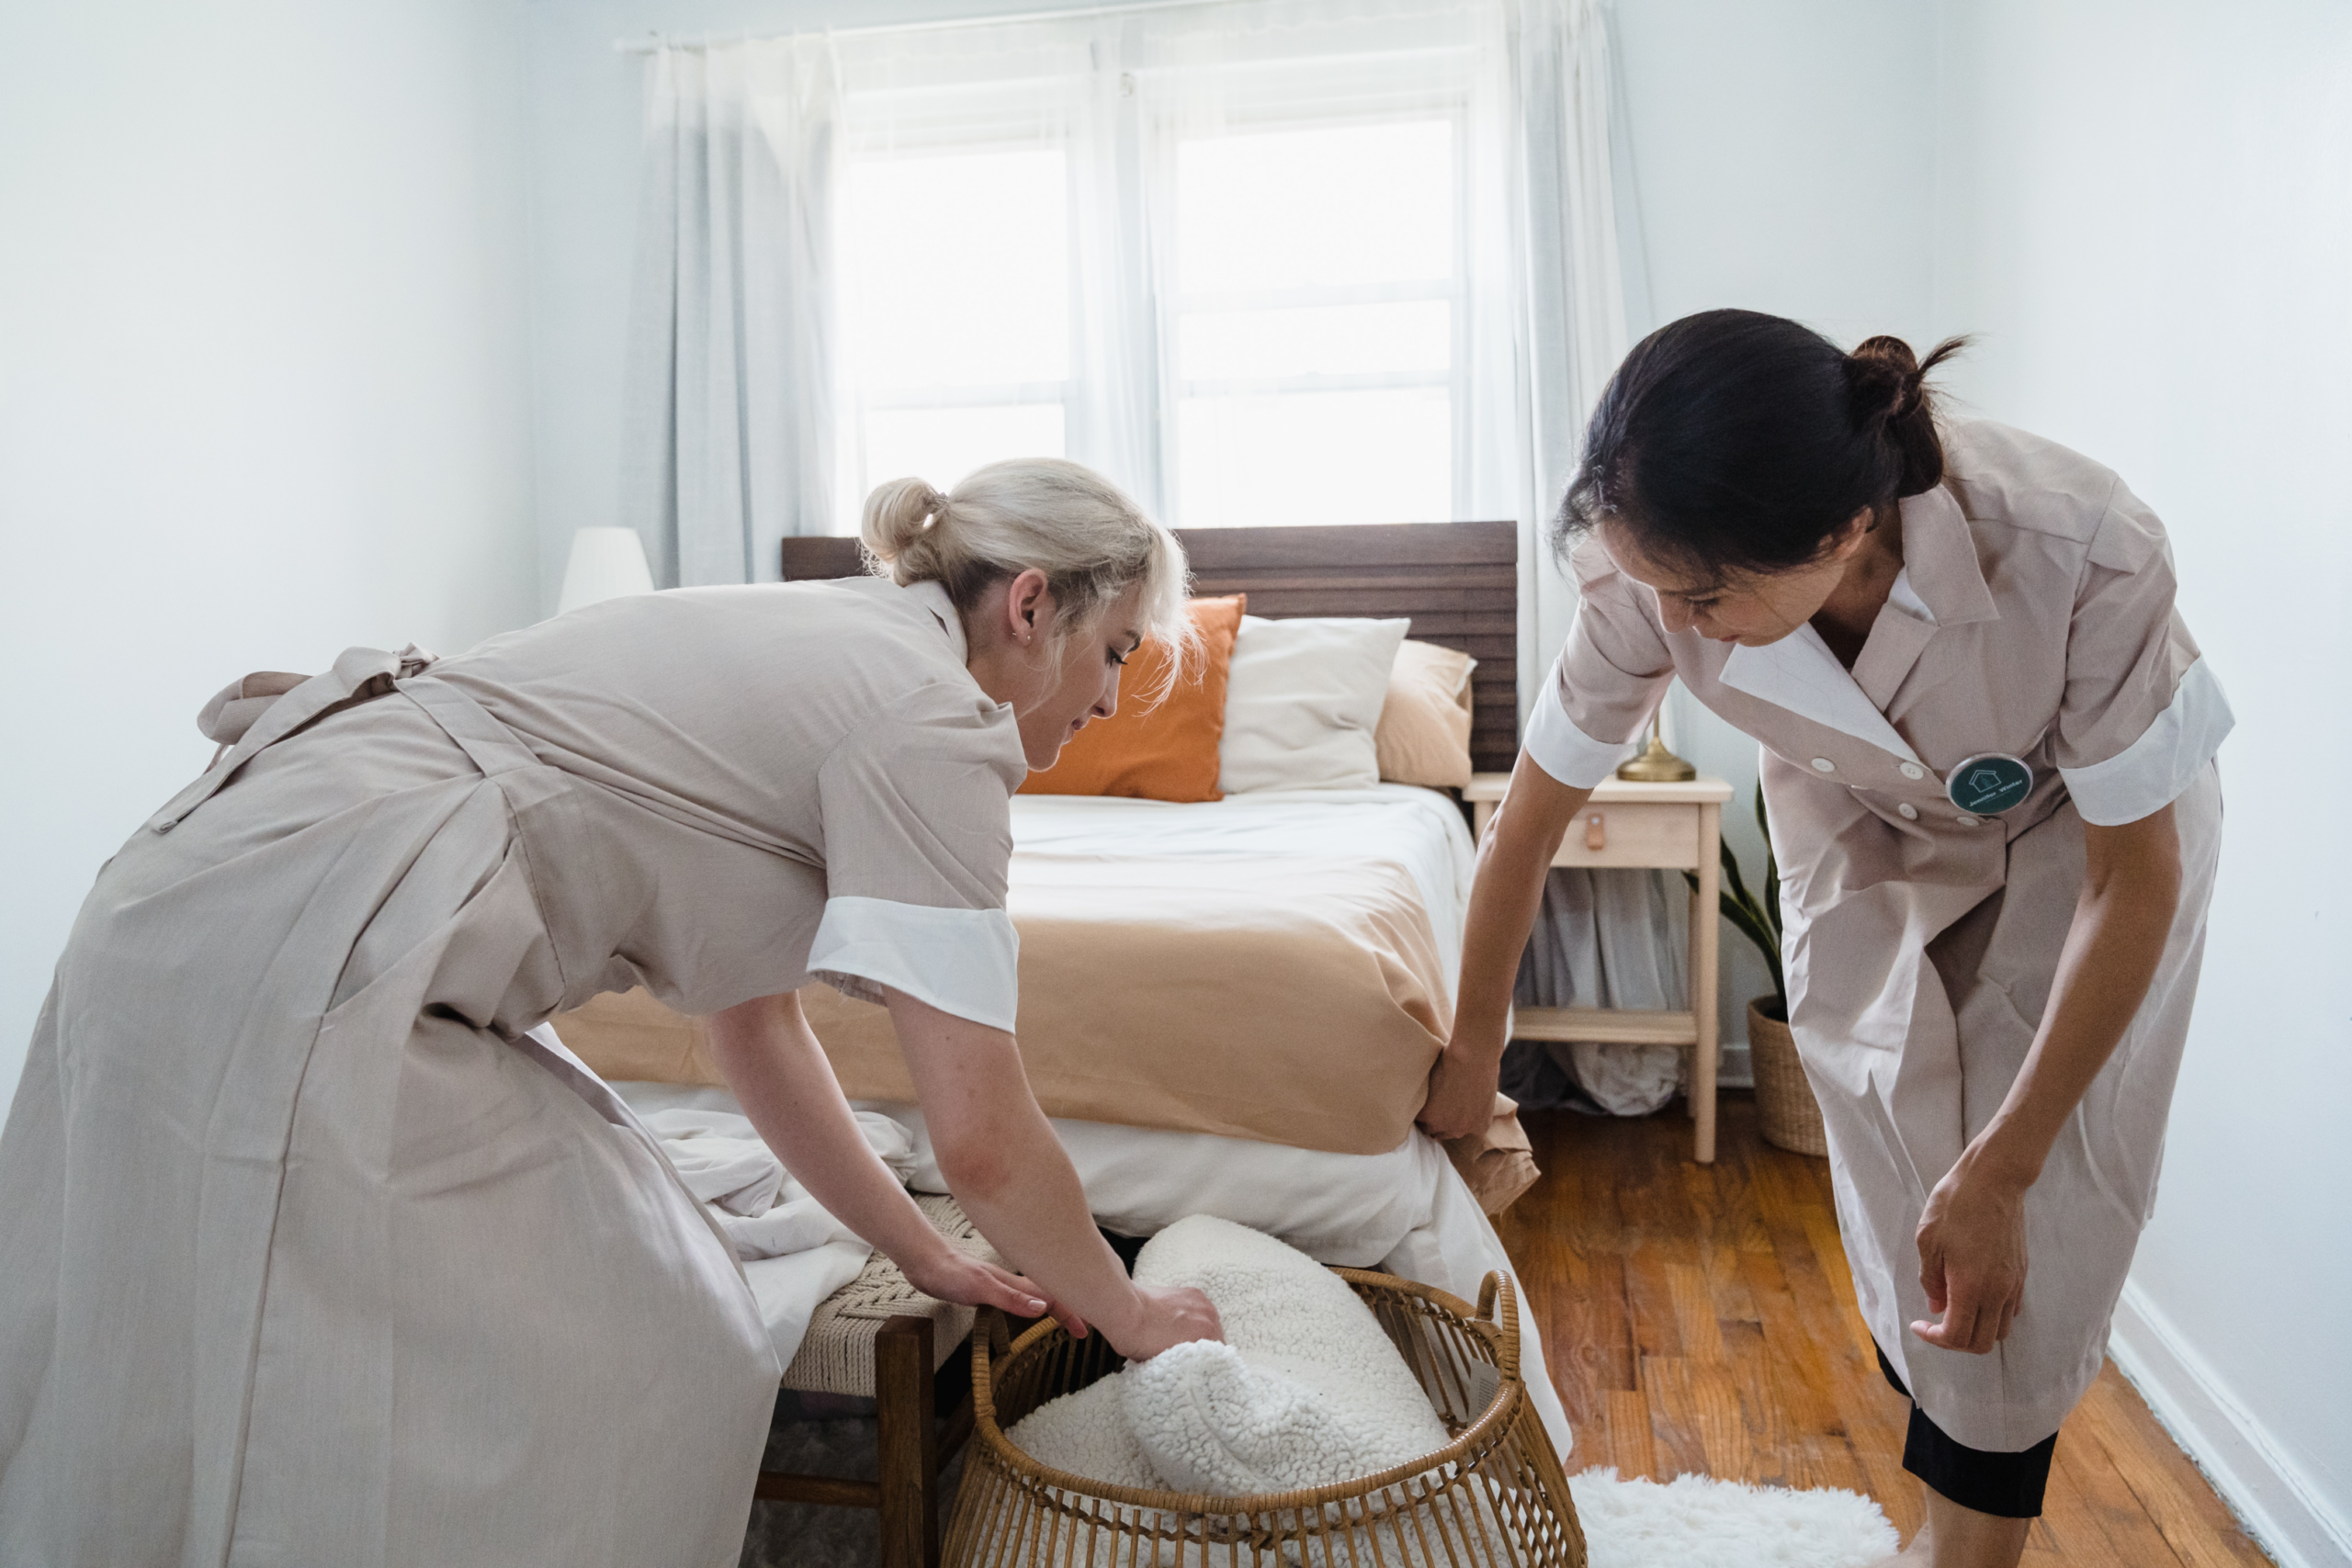 Image of two cleaners setting up a room